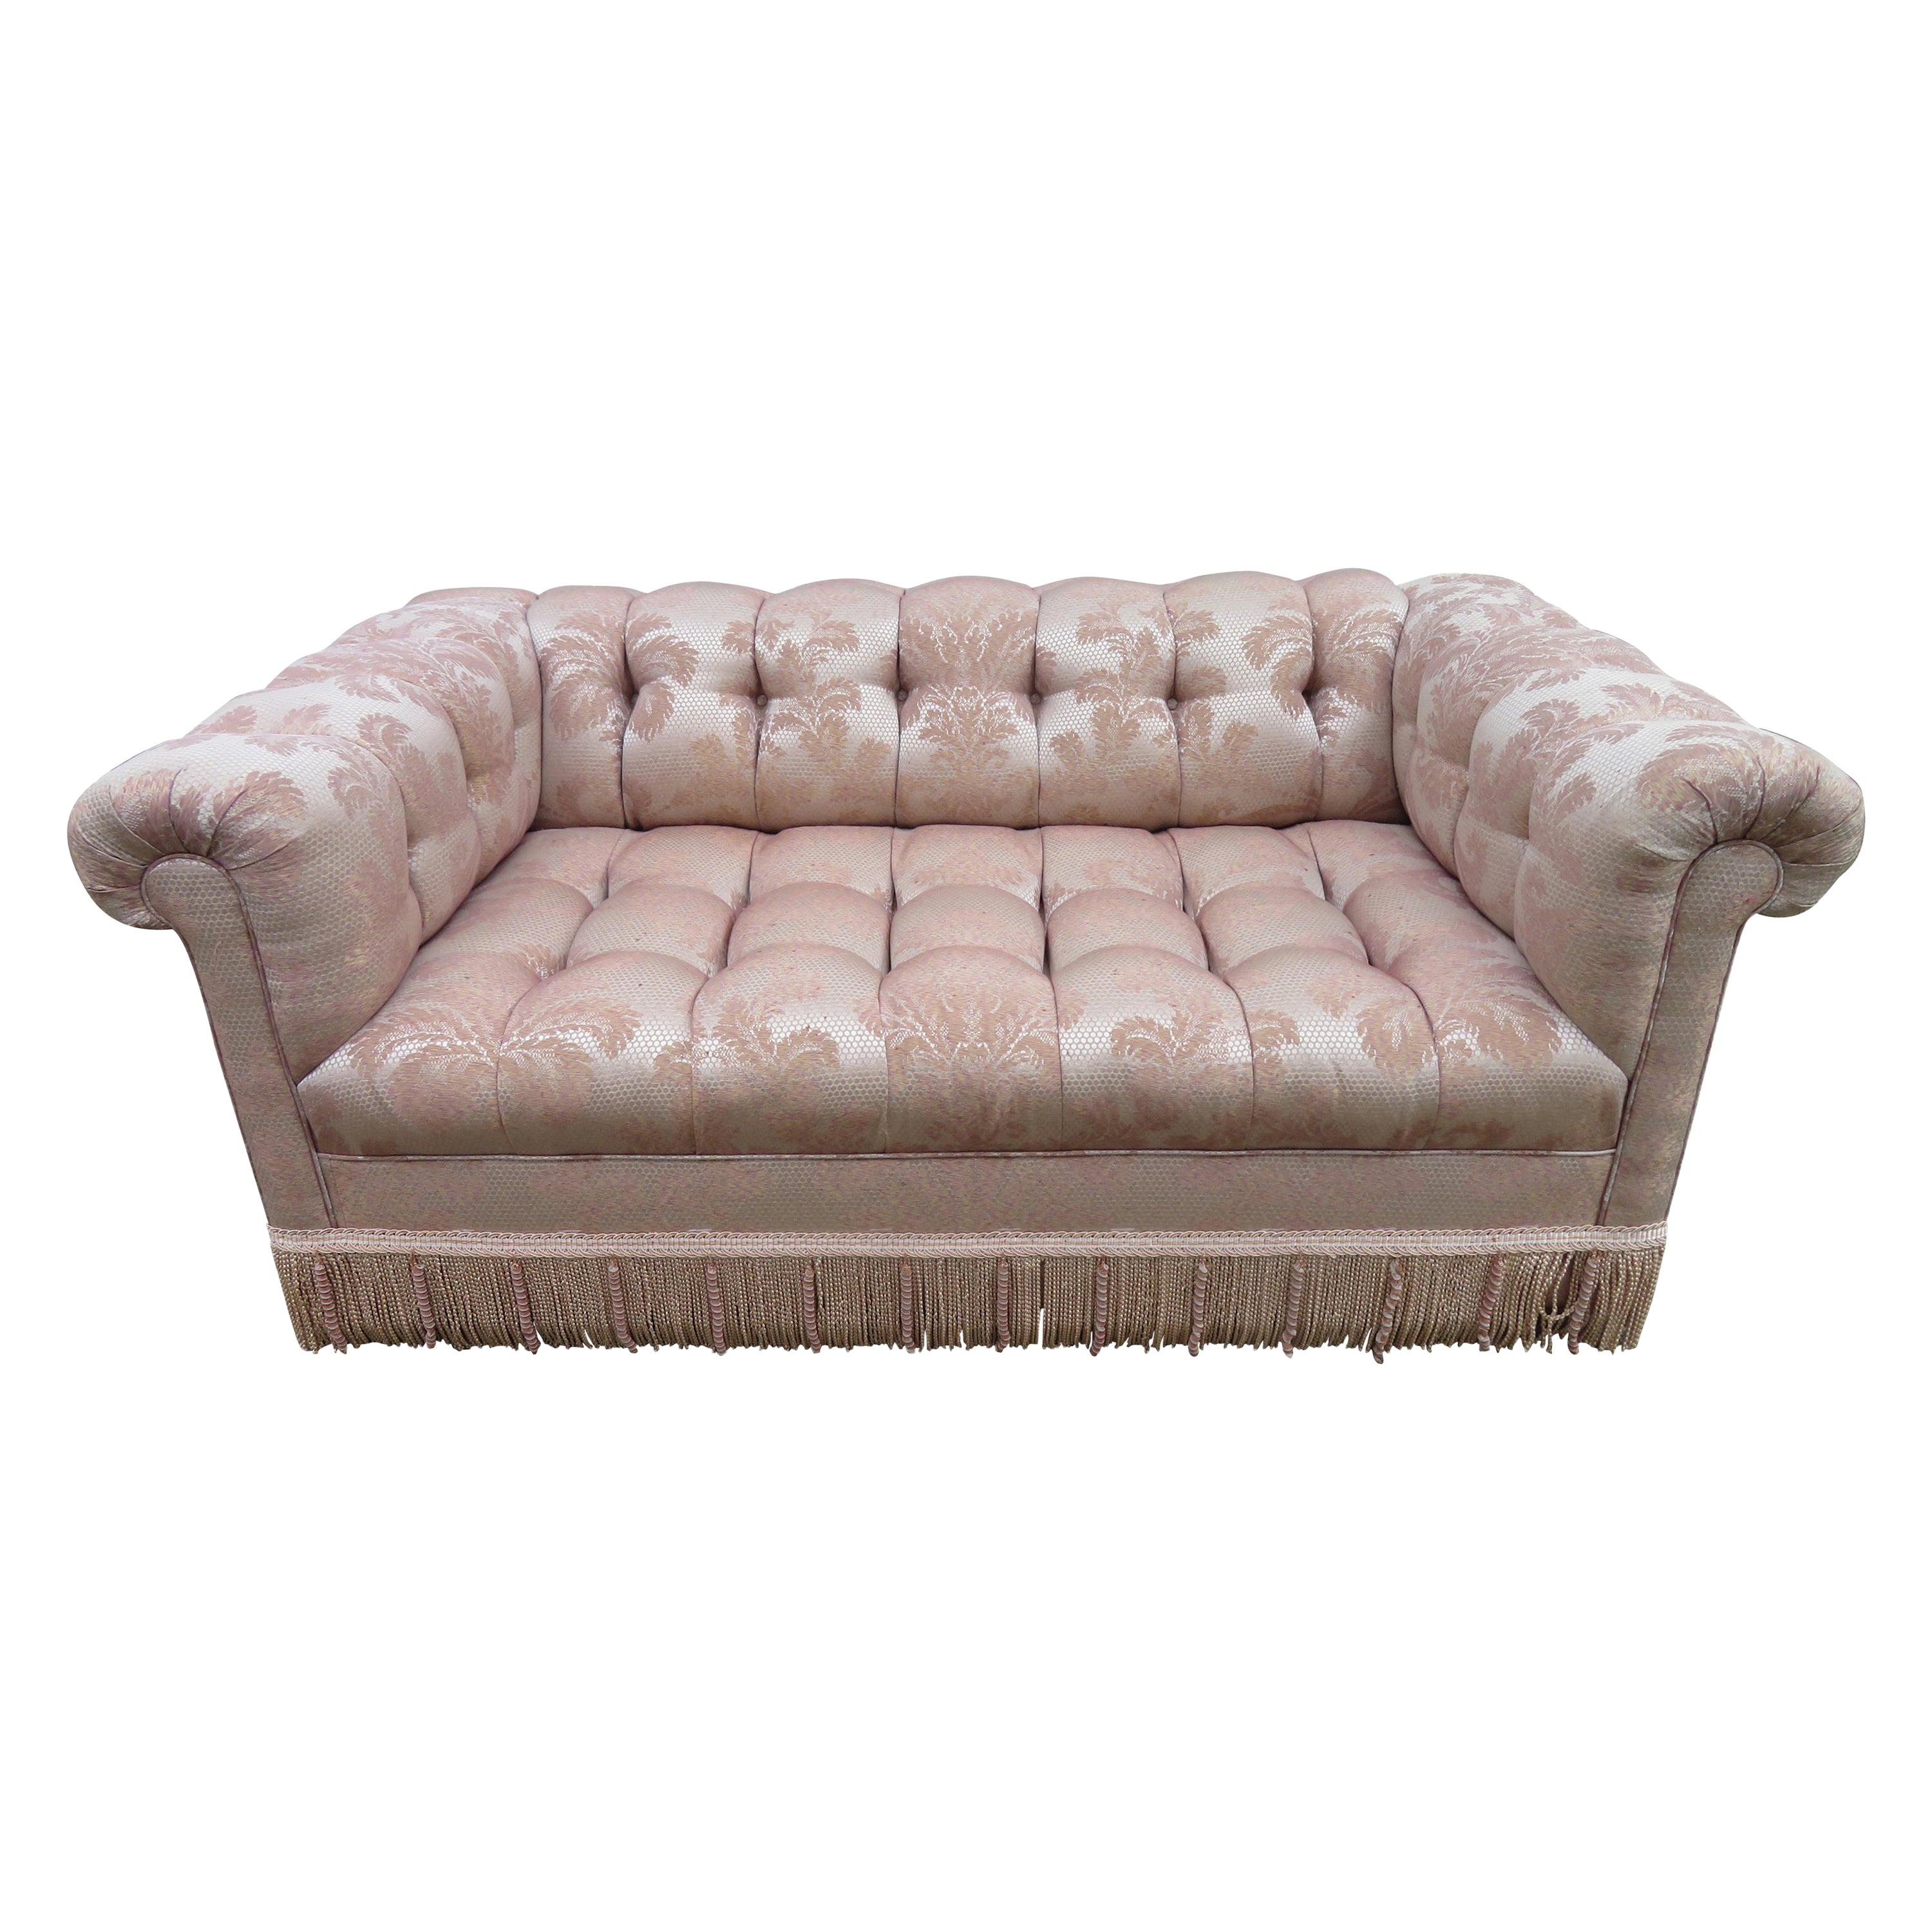 Magnificent Directional Biscuit Tufted Party Loveseat Sofa Modern